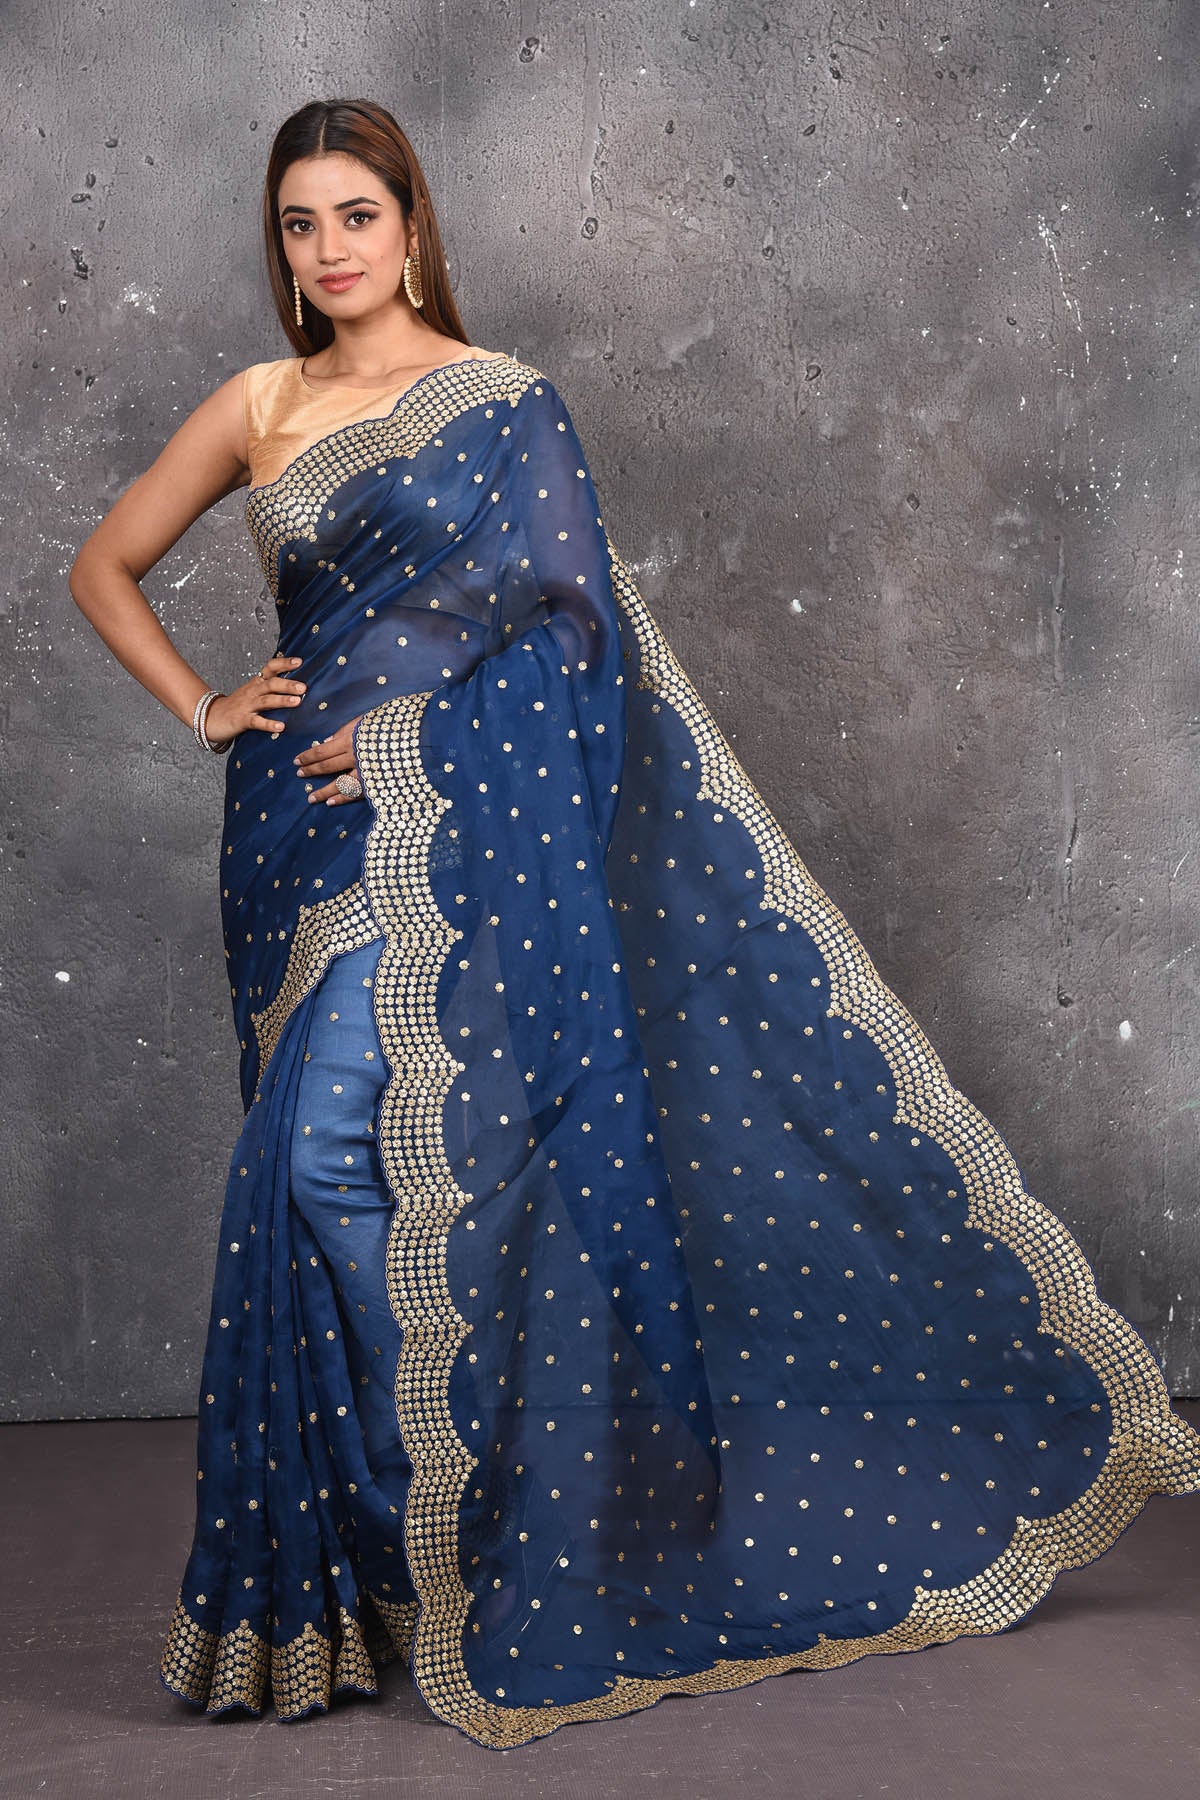 Buy exquisite navy blue organza saree with golden embroidered online in USA. Pure organza sarees by Pure Elegance in blue color. It has a beautiful gold embroidered border. This organza brings the charm and simplicity of this saree with border and pallu with the delegate embroidery work on border. Shop this designer silk sari from Pure Elegance Indian fashion store in USA.-Full view with open pallu.